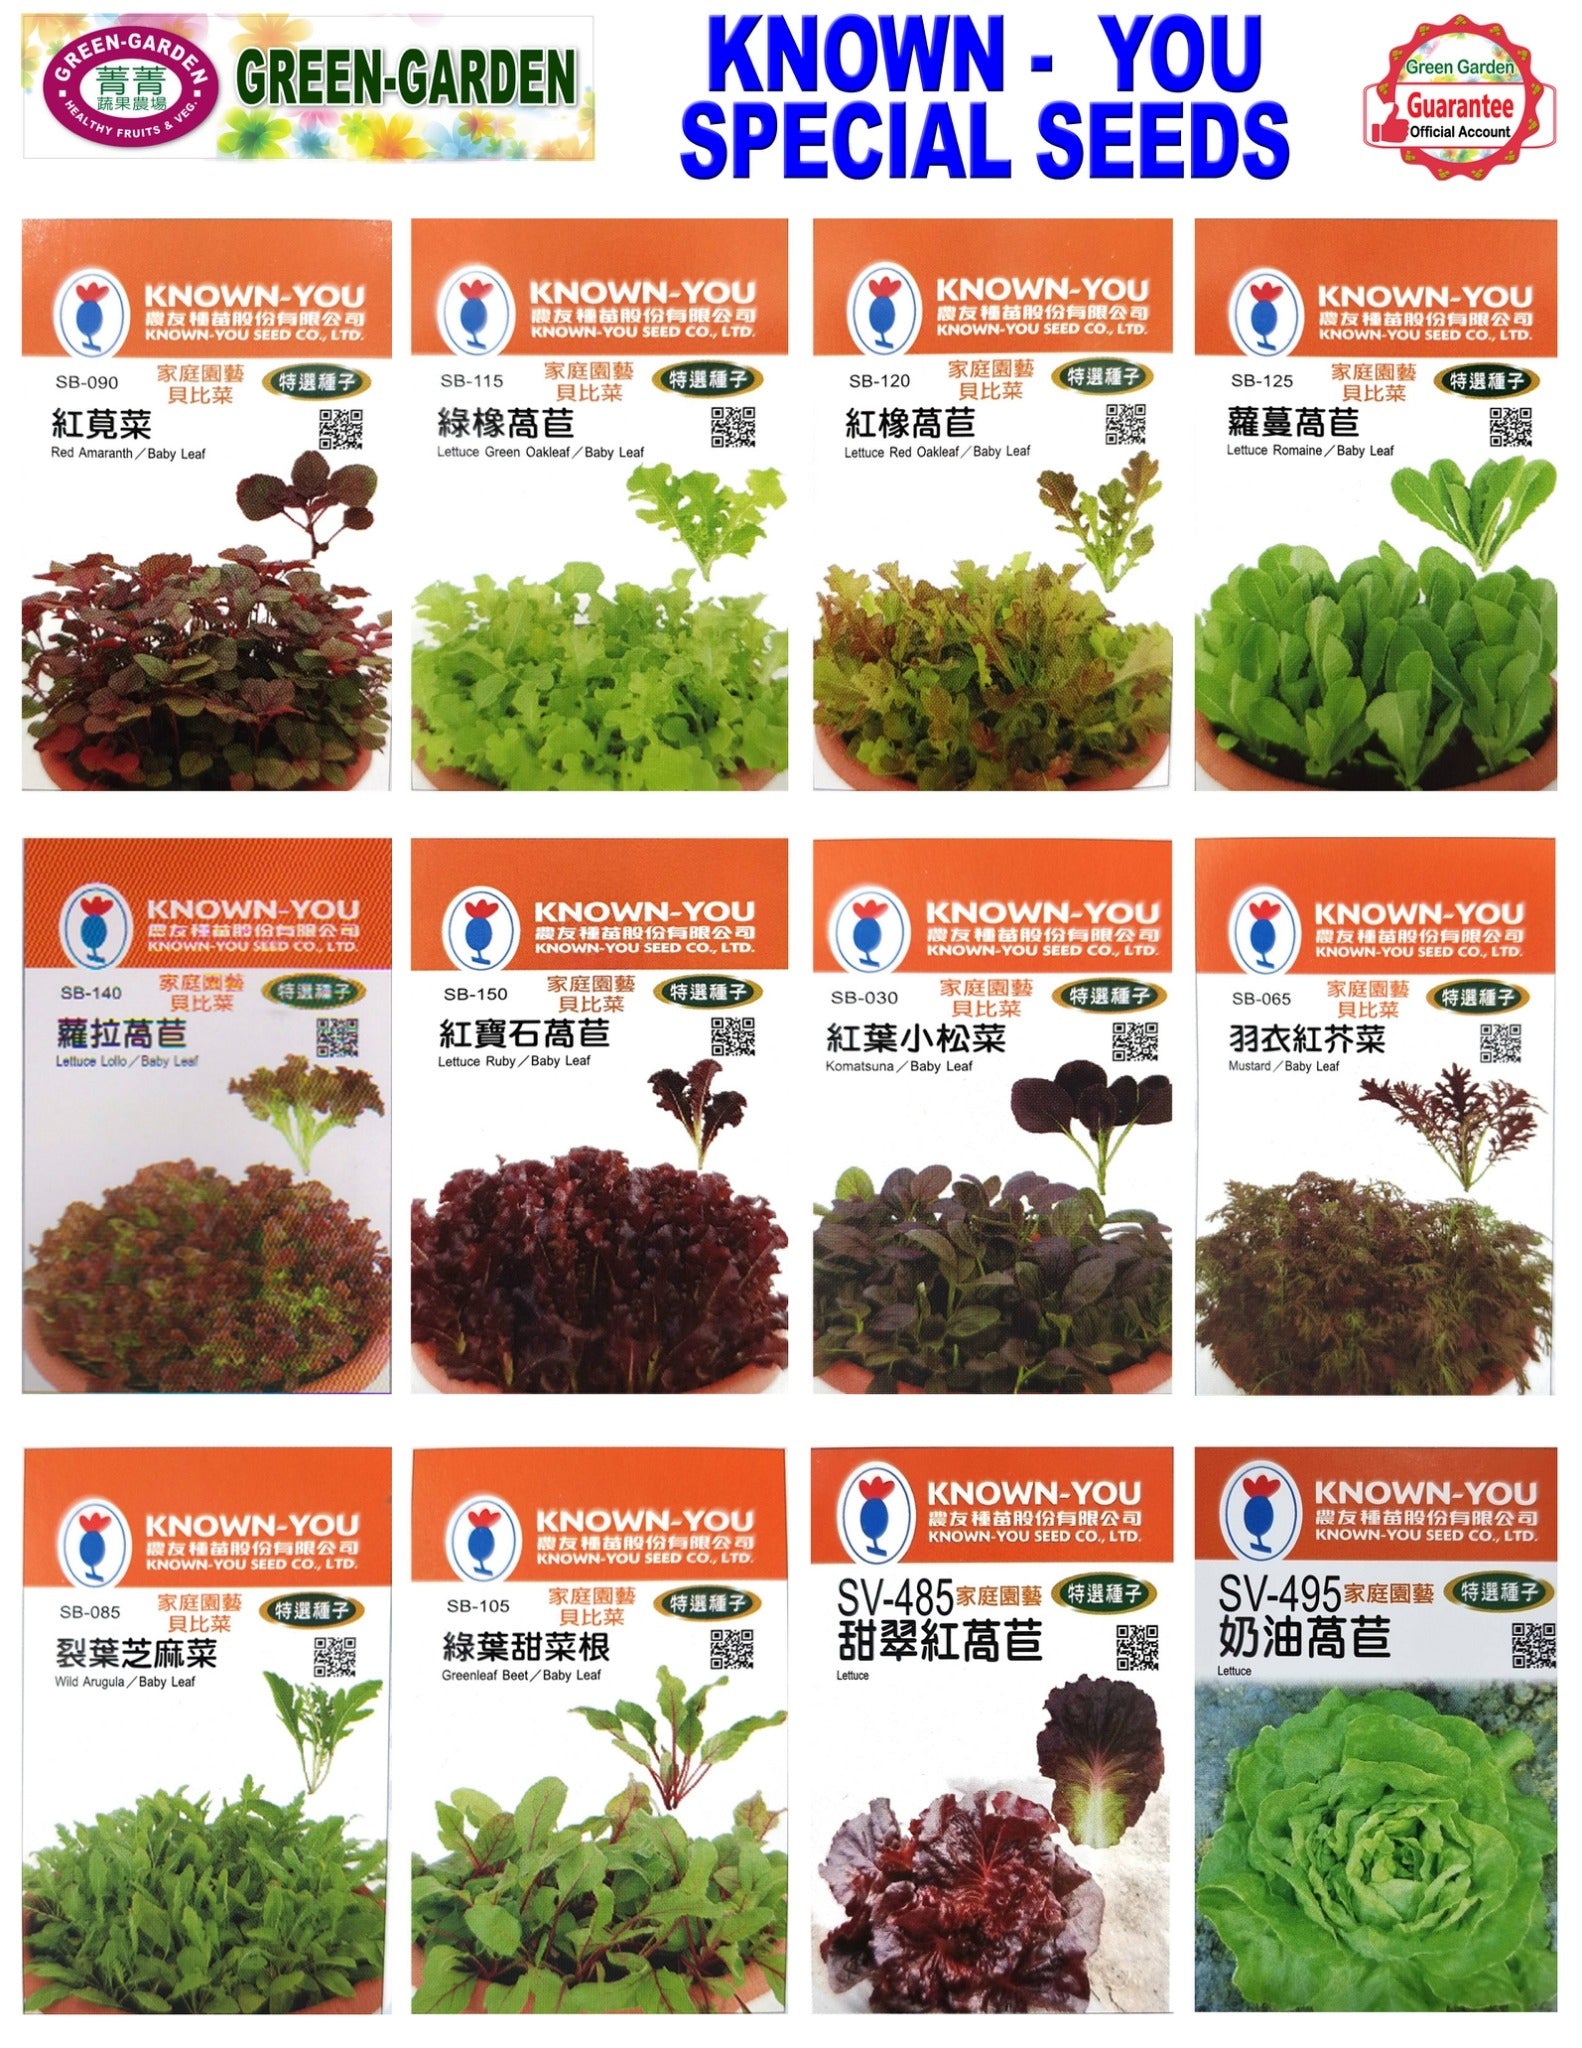 Known You Special Seeds (SV-115 Cabbage (Red))